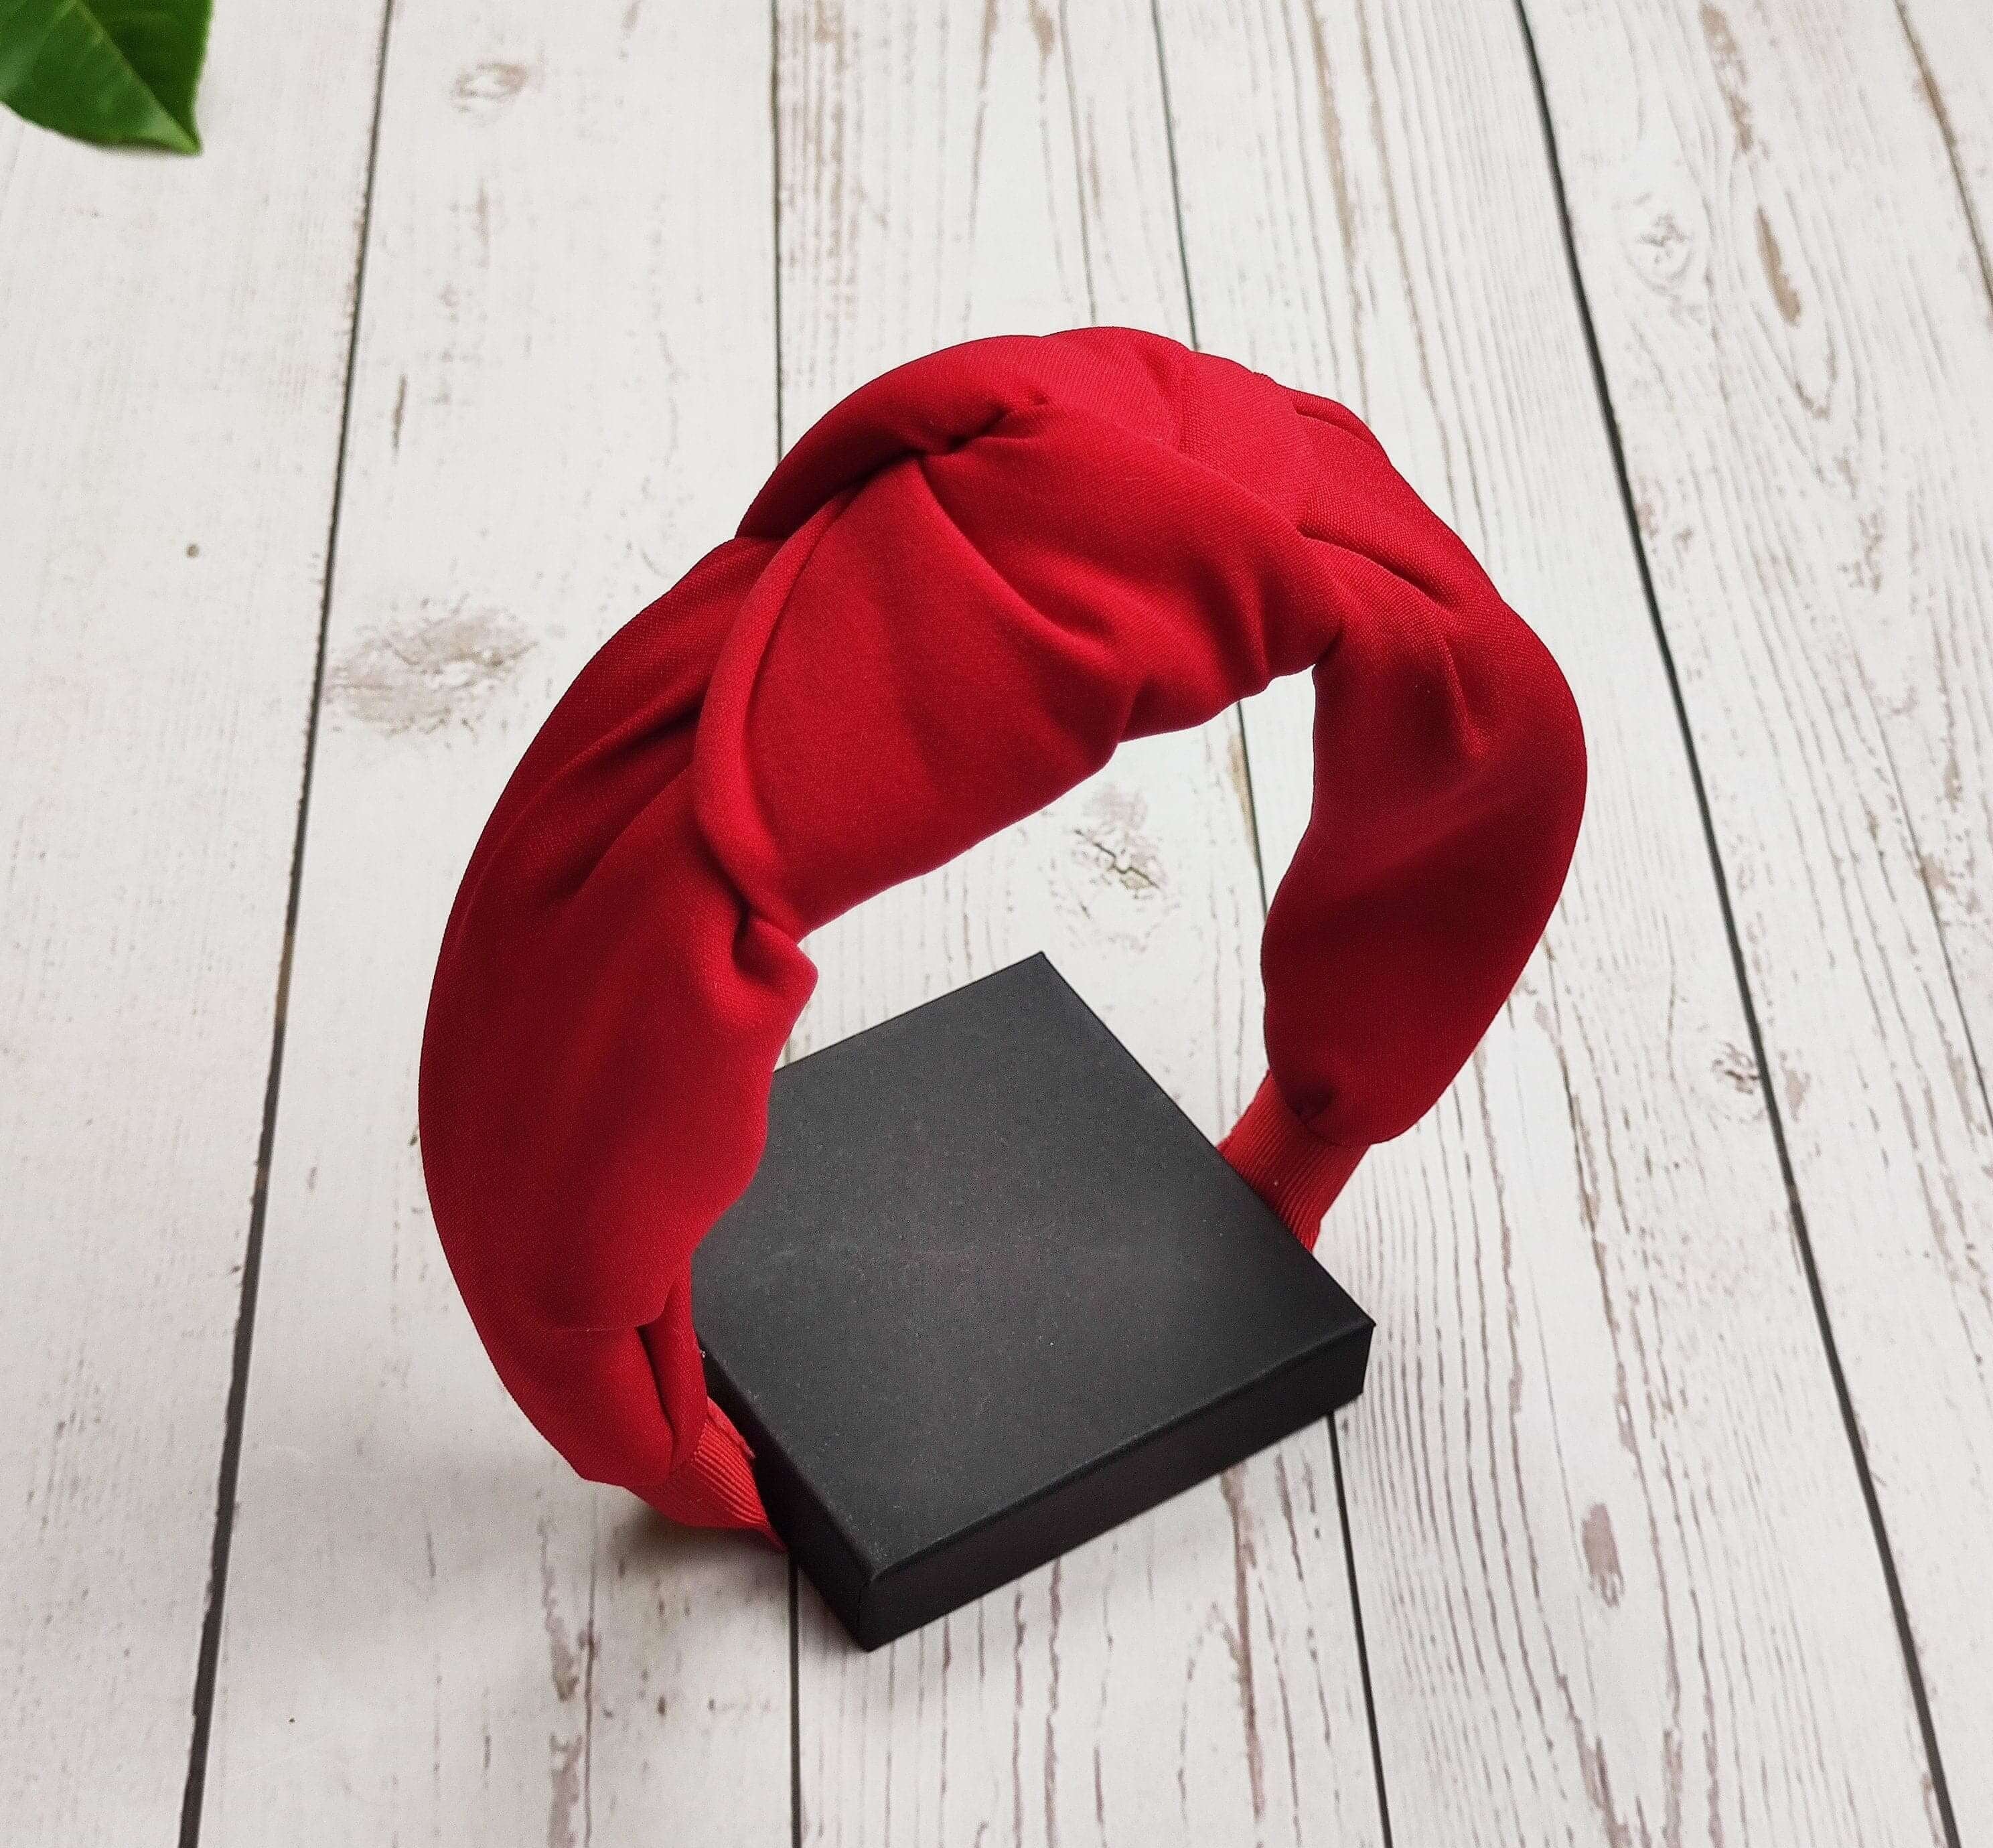 Check out our collection of fashionable hair accessories today, including our popular tie headband! This versatile accessory can be worn as a hair band, headband, or even scarf-style!